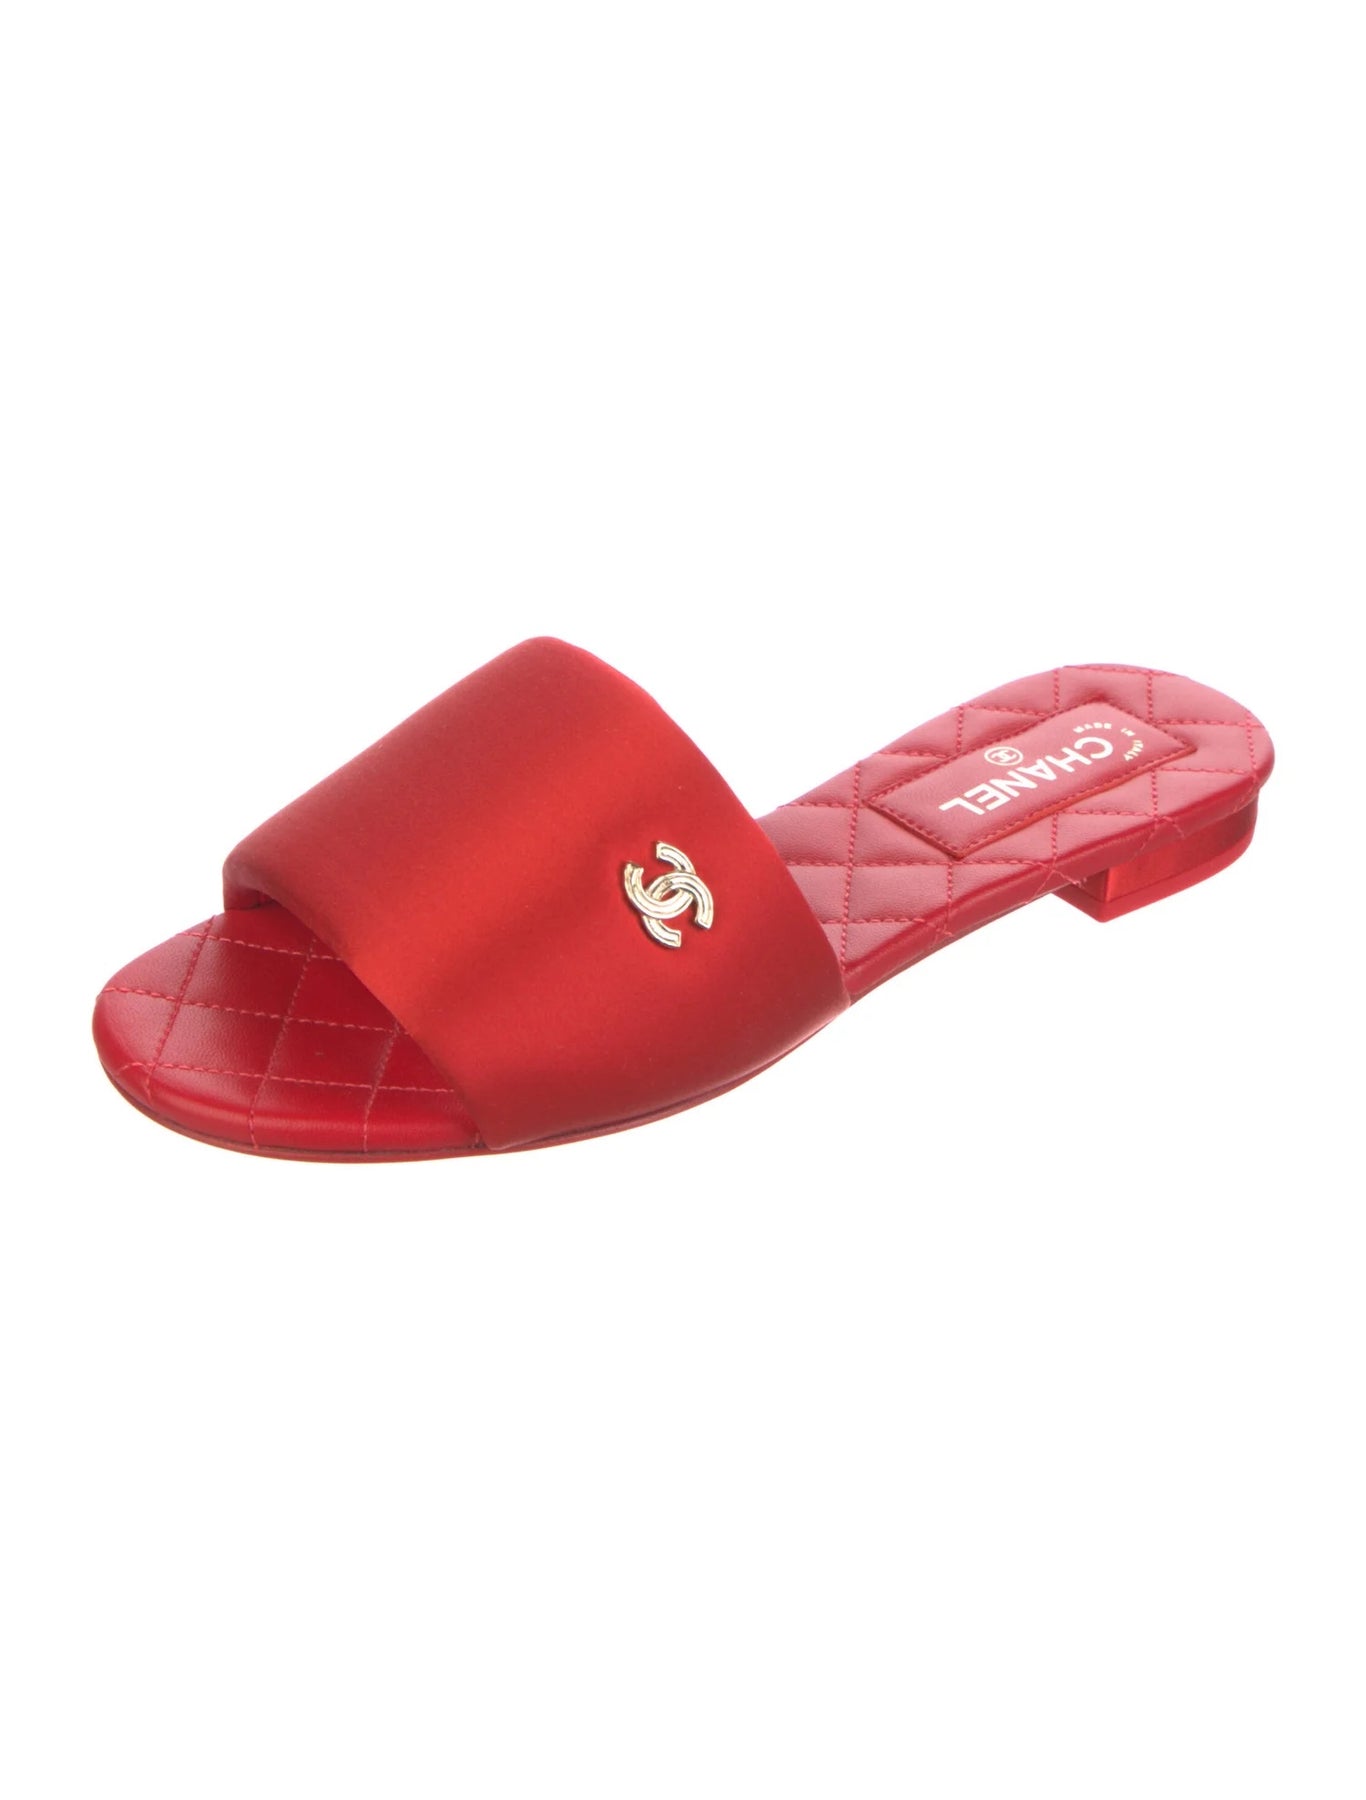 SOLD🔥Chanel Red Patent Maxi Cc Logo Mules Slides